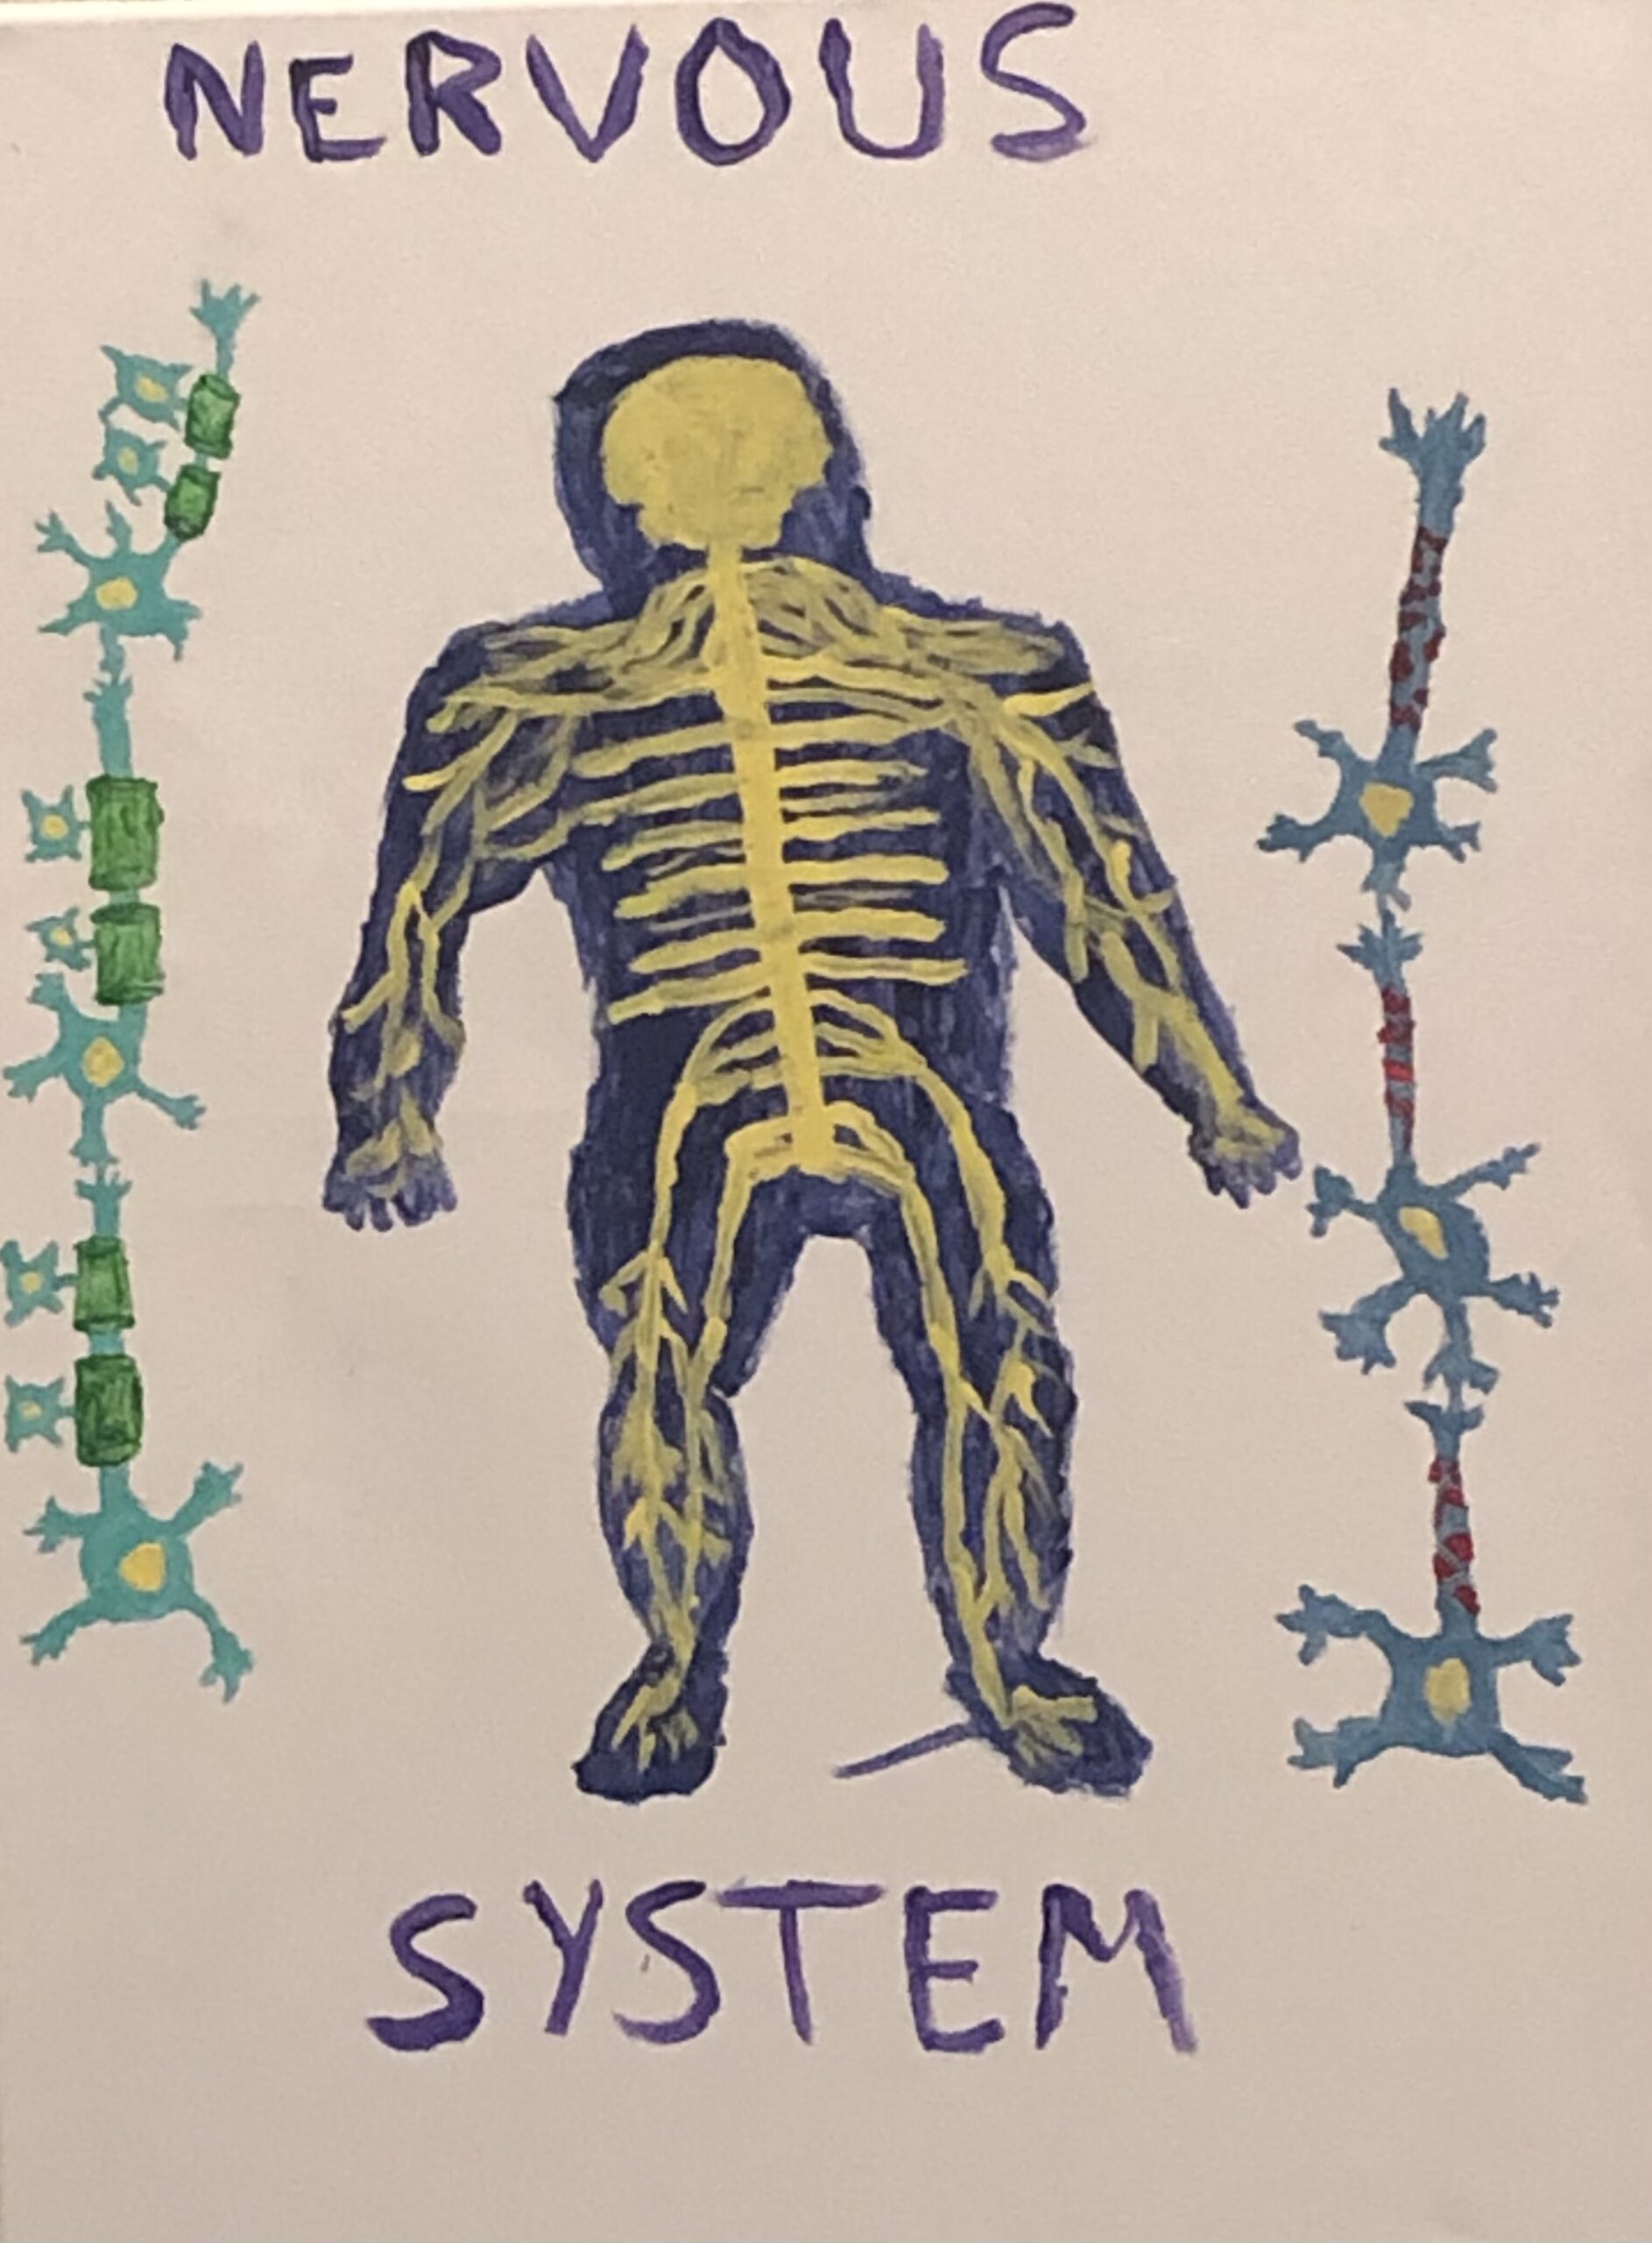 Nervous System STEAM Project